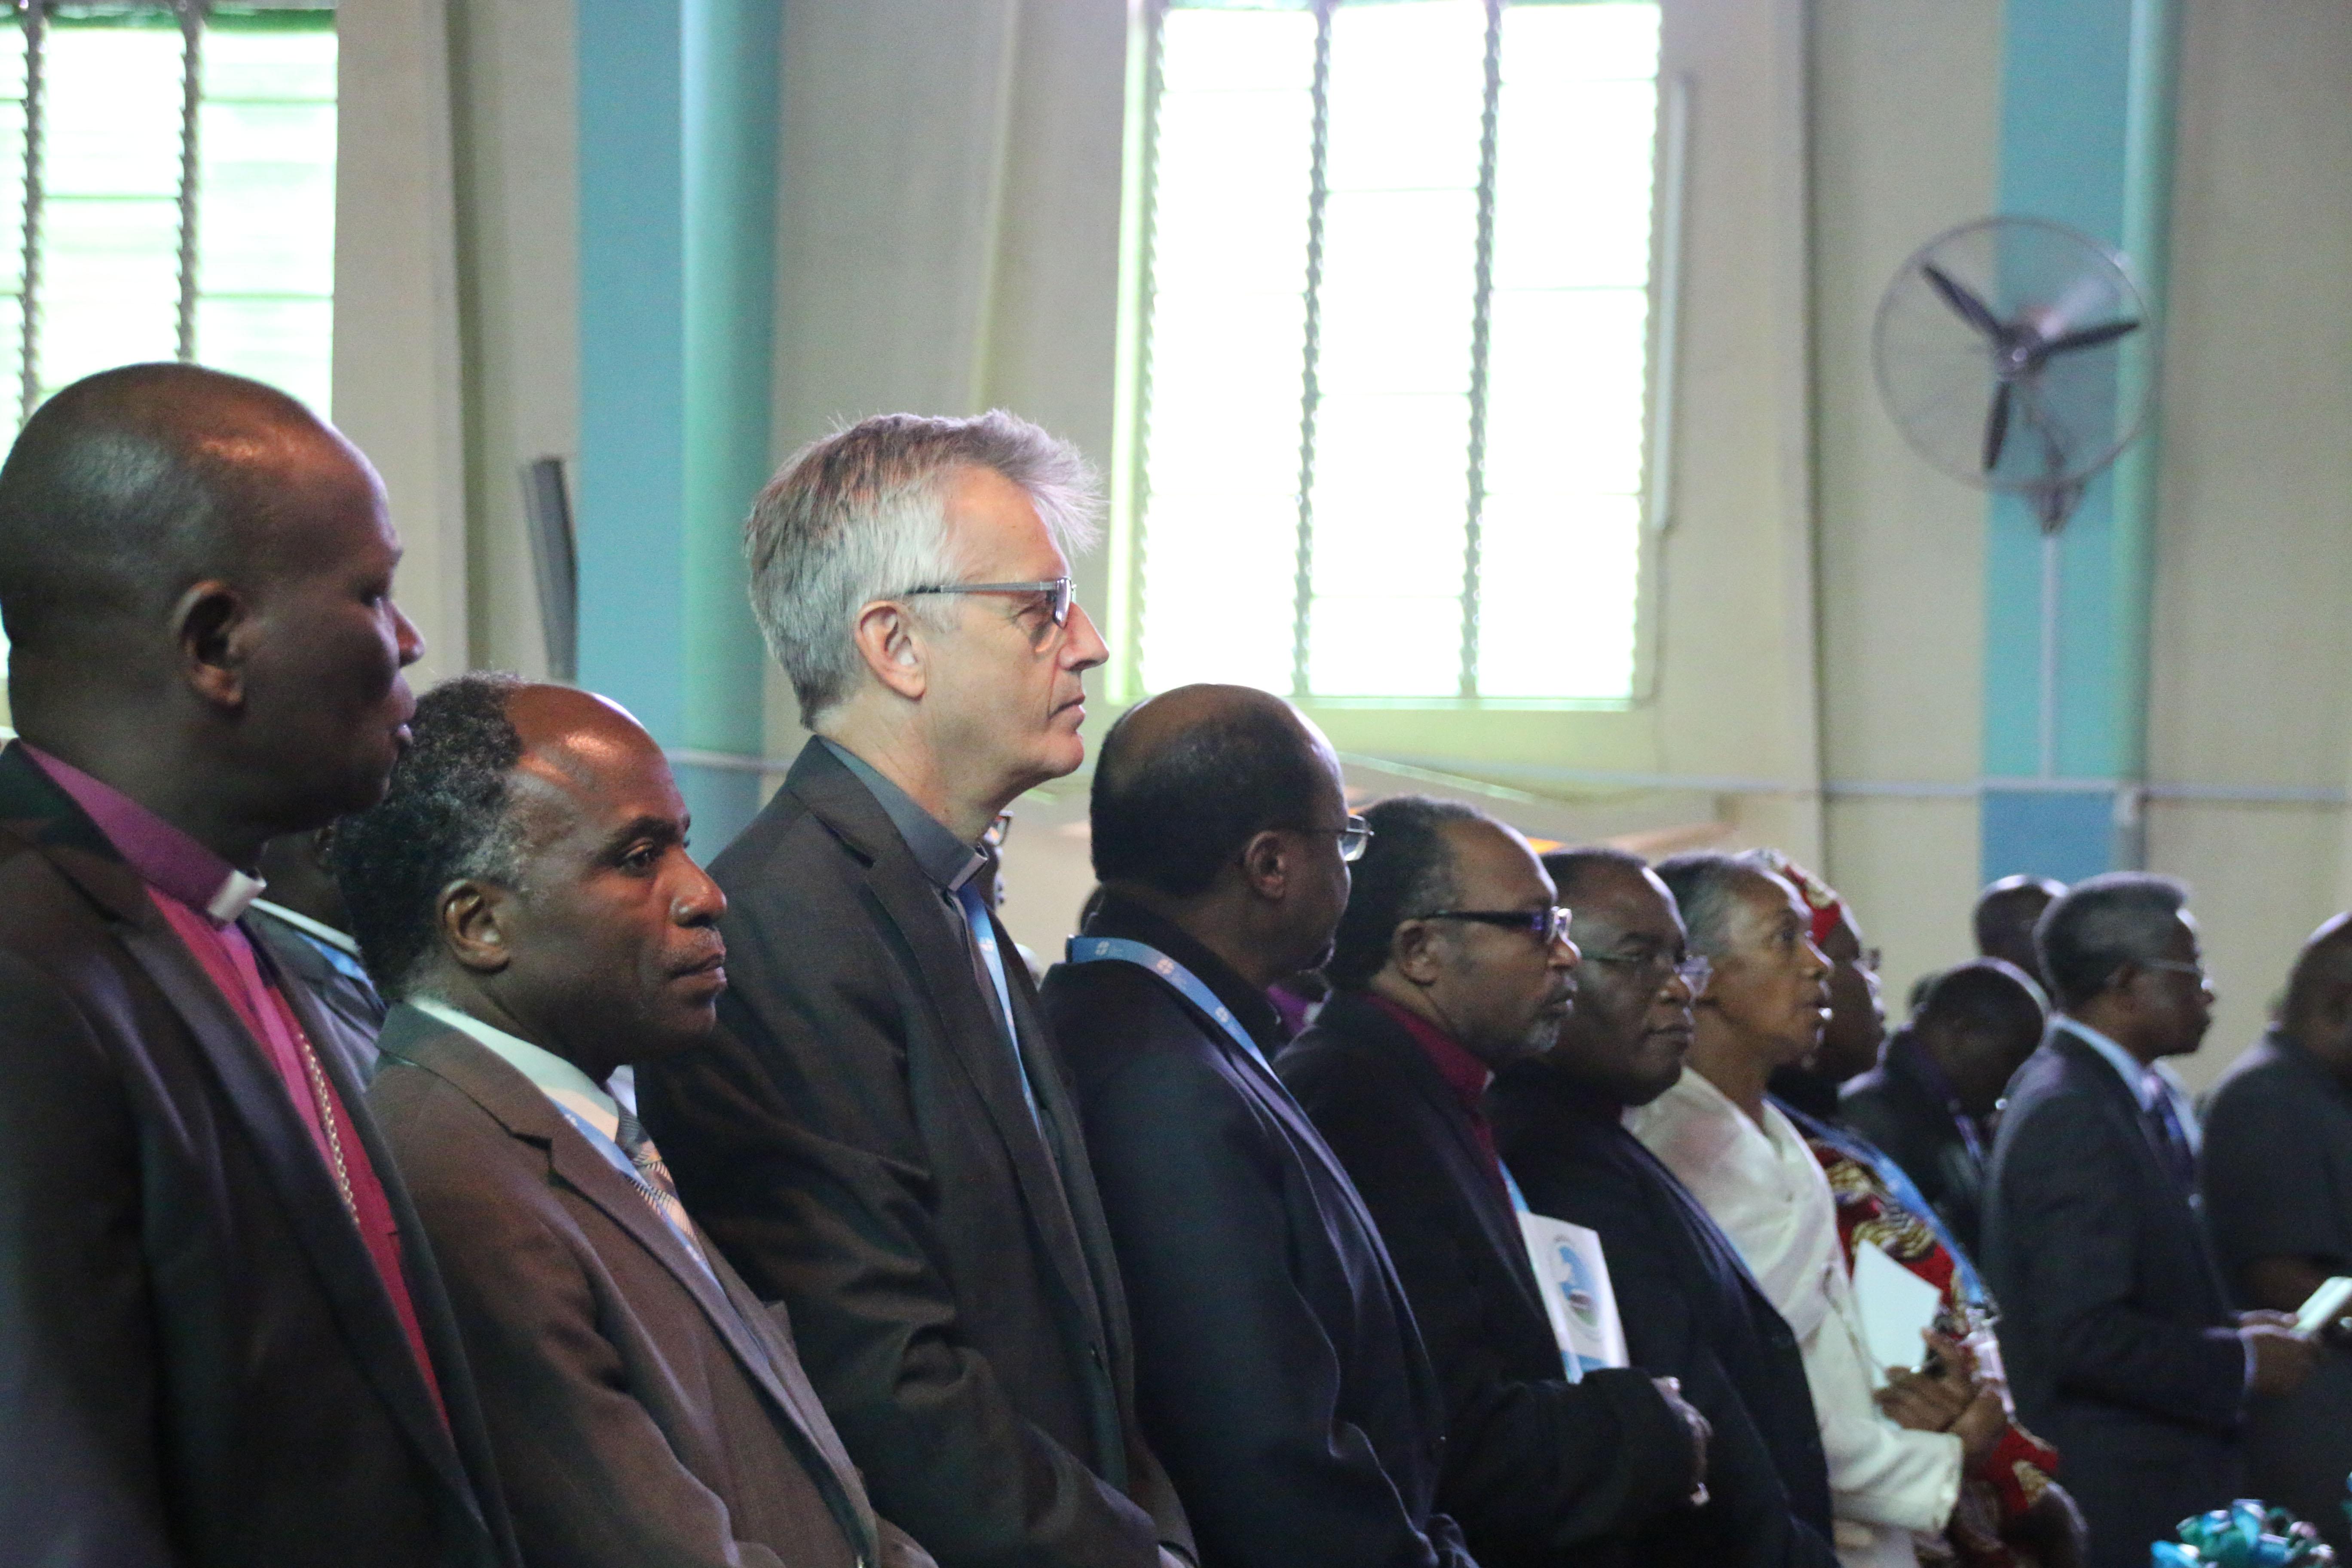 LWF General Secretary Rev. Martin Junge worships among several Lutheran leaders and ecumenical partners from around the world. Photo: Allison Westerhoff